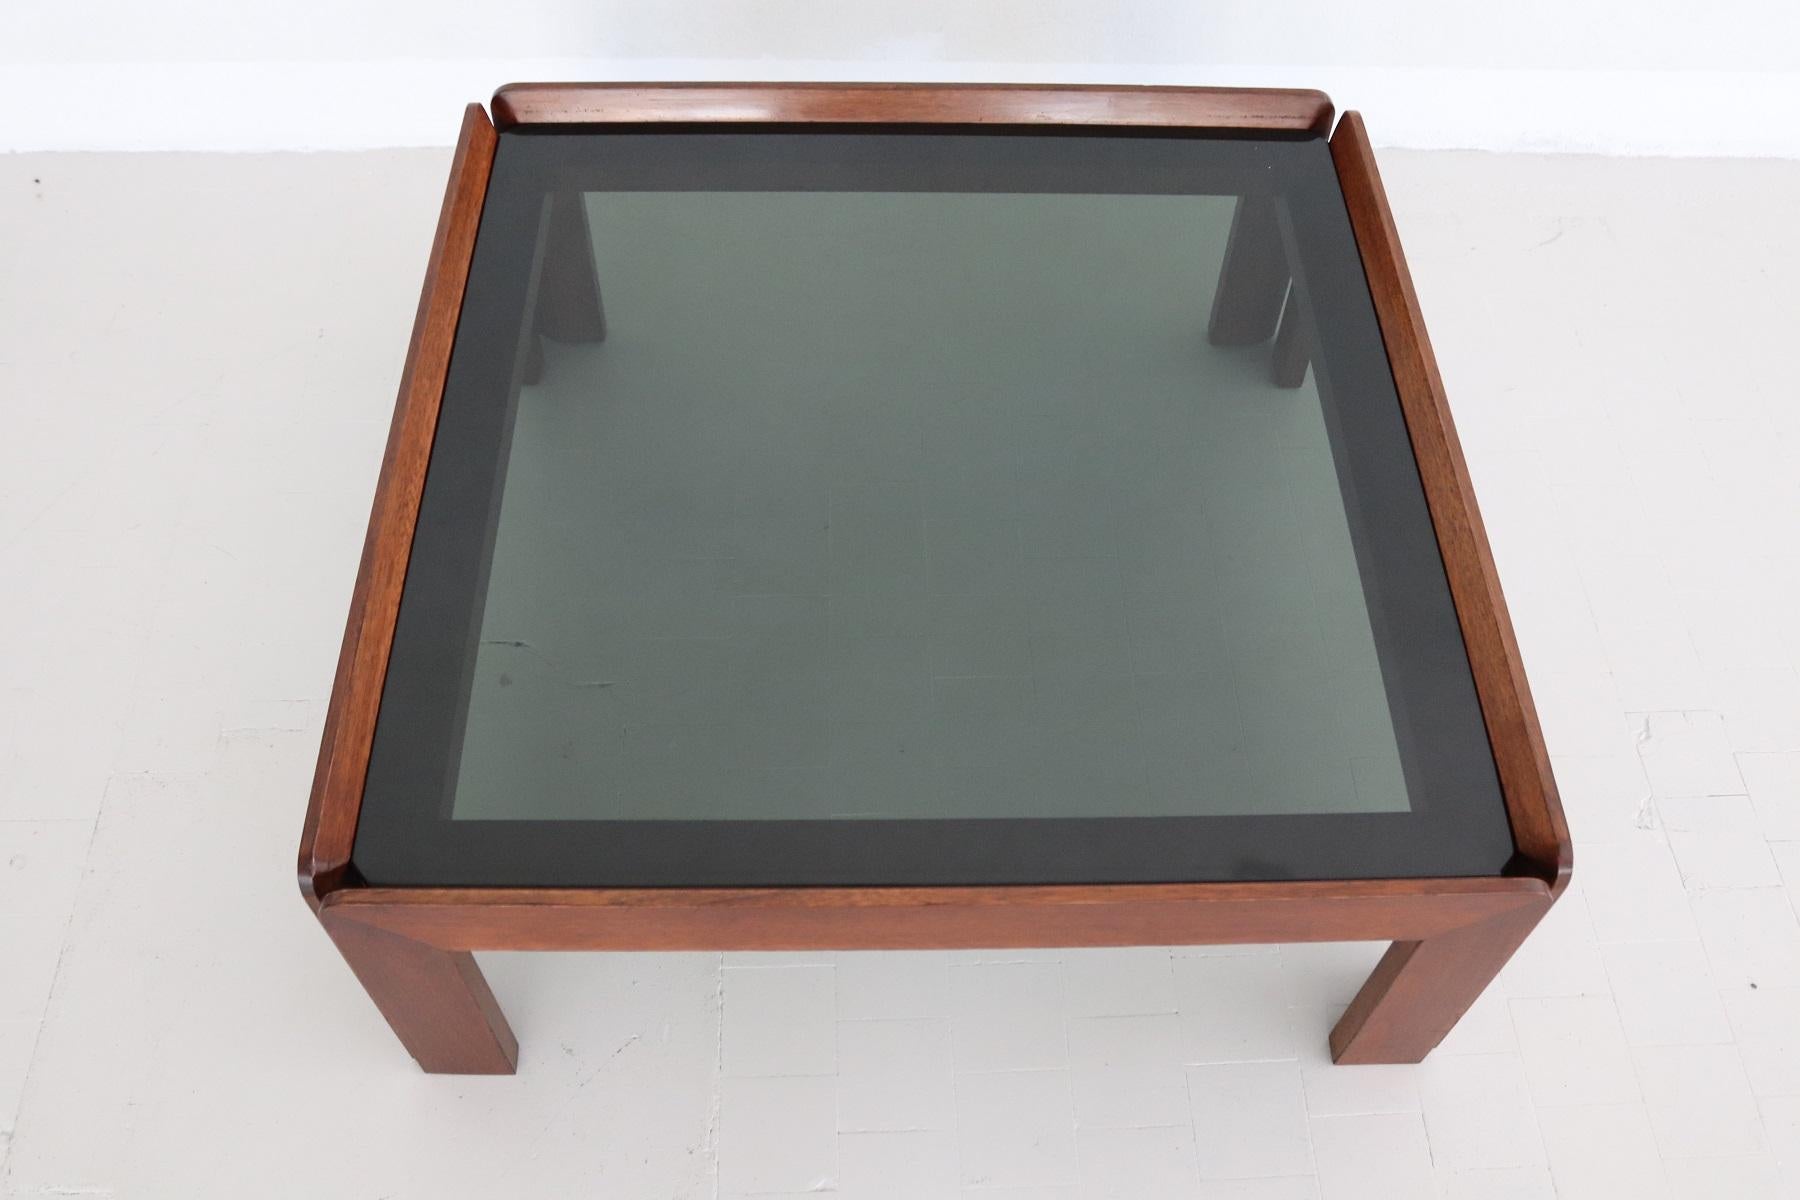 Italian Midcentury Square Coffee Table in Beechwood and Smoked Glass, 1960s For Sale 8